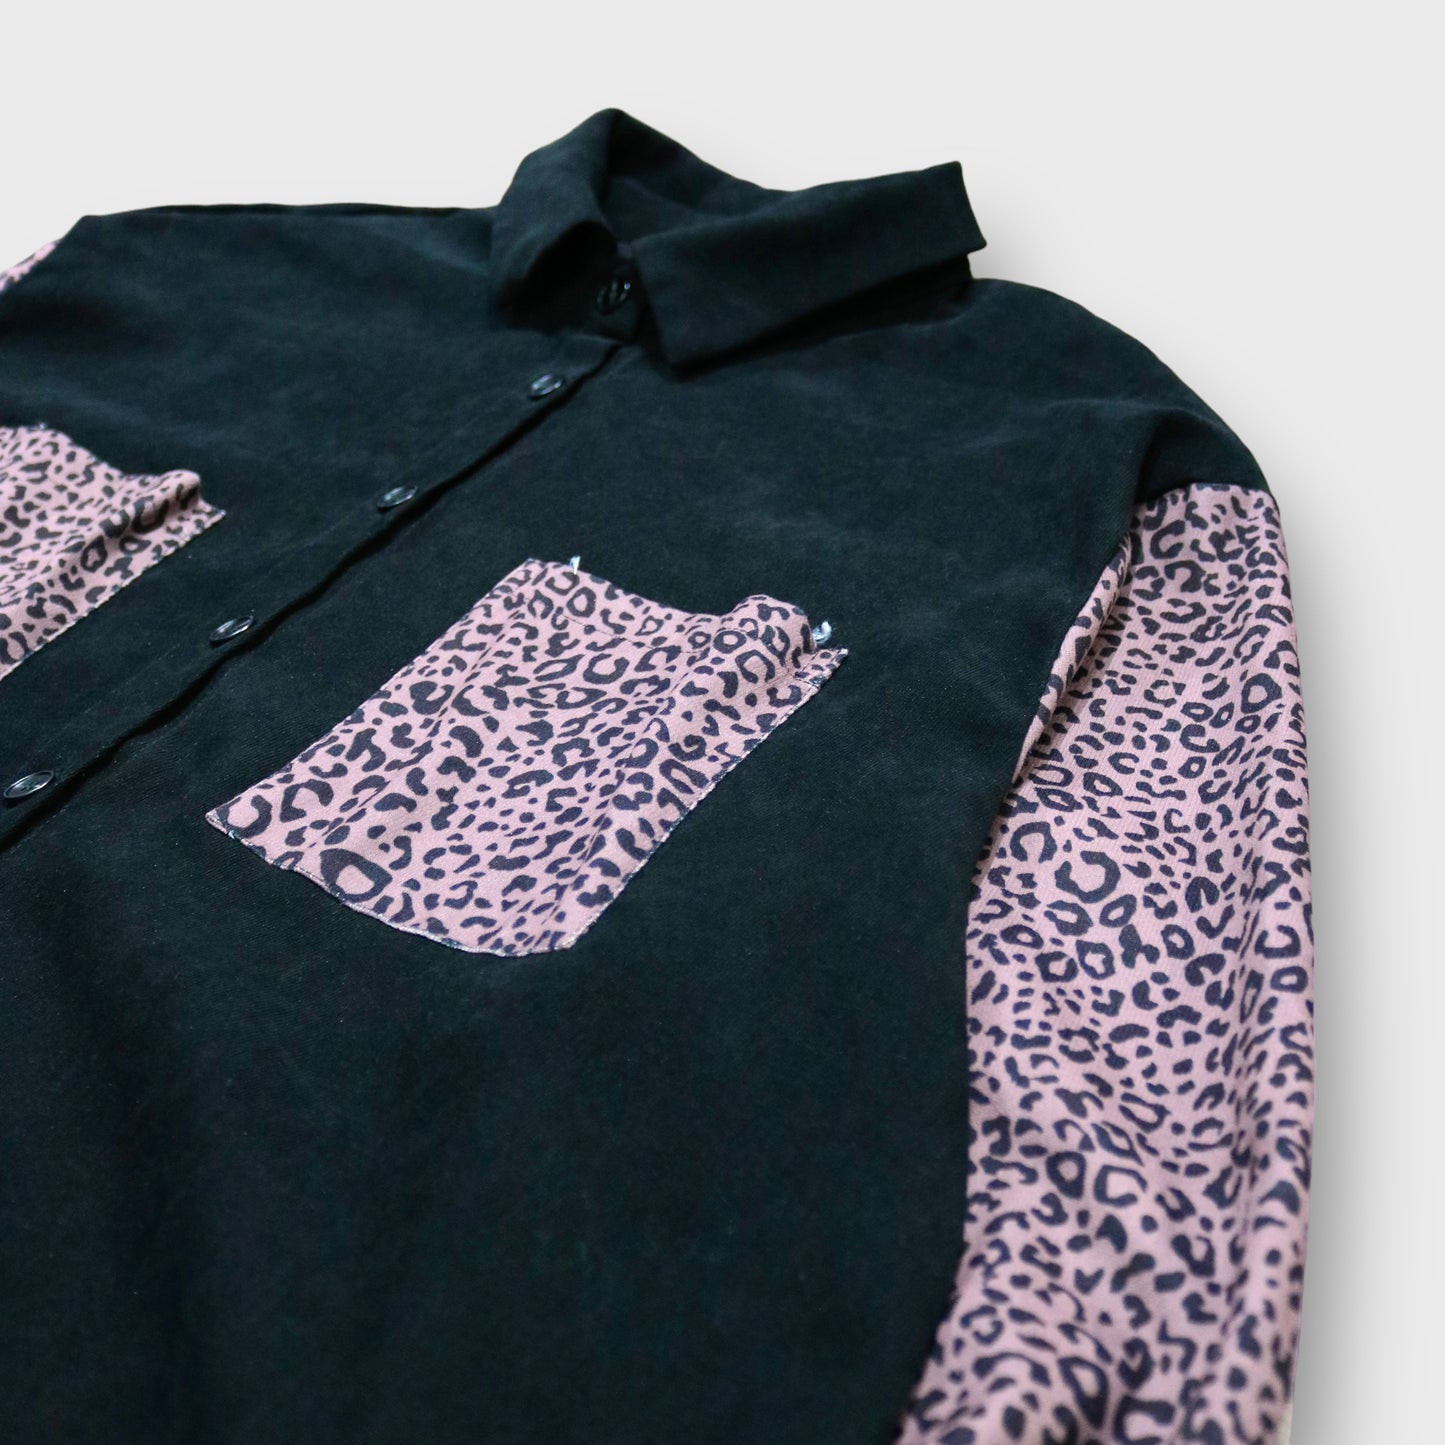 Fake suede leopard switching shirt